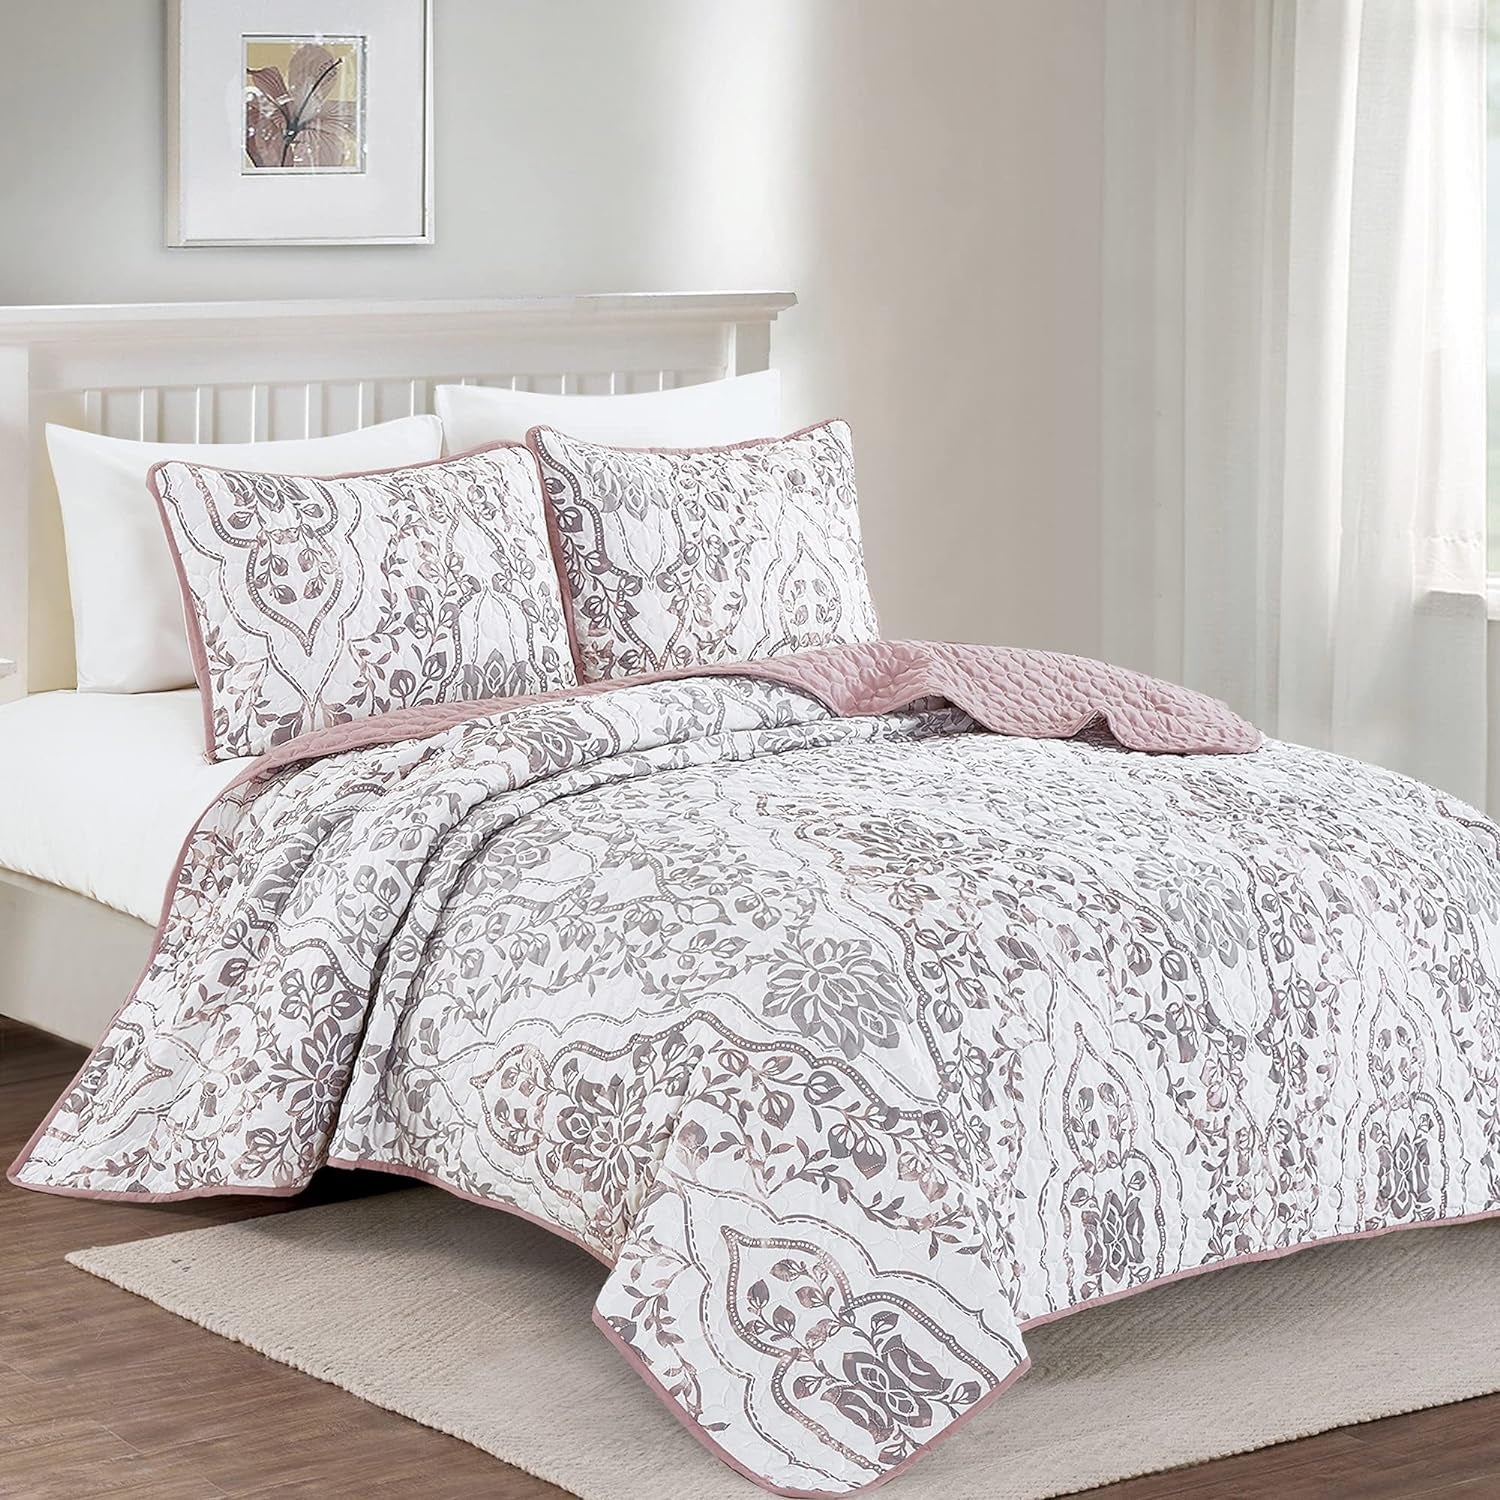 3-Piece Fine Printed Queen Size Quilt Set, All-Season Bedspread, Cheyne Coverlet with Pillow Shams Bed Cover (Coral Pink, Grey, Floral)